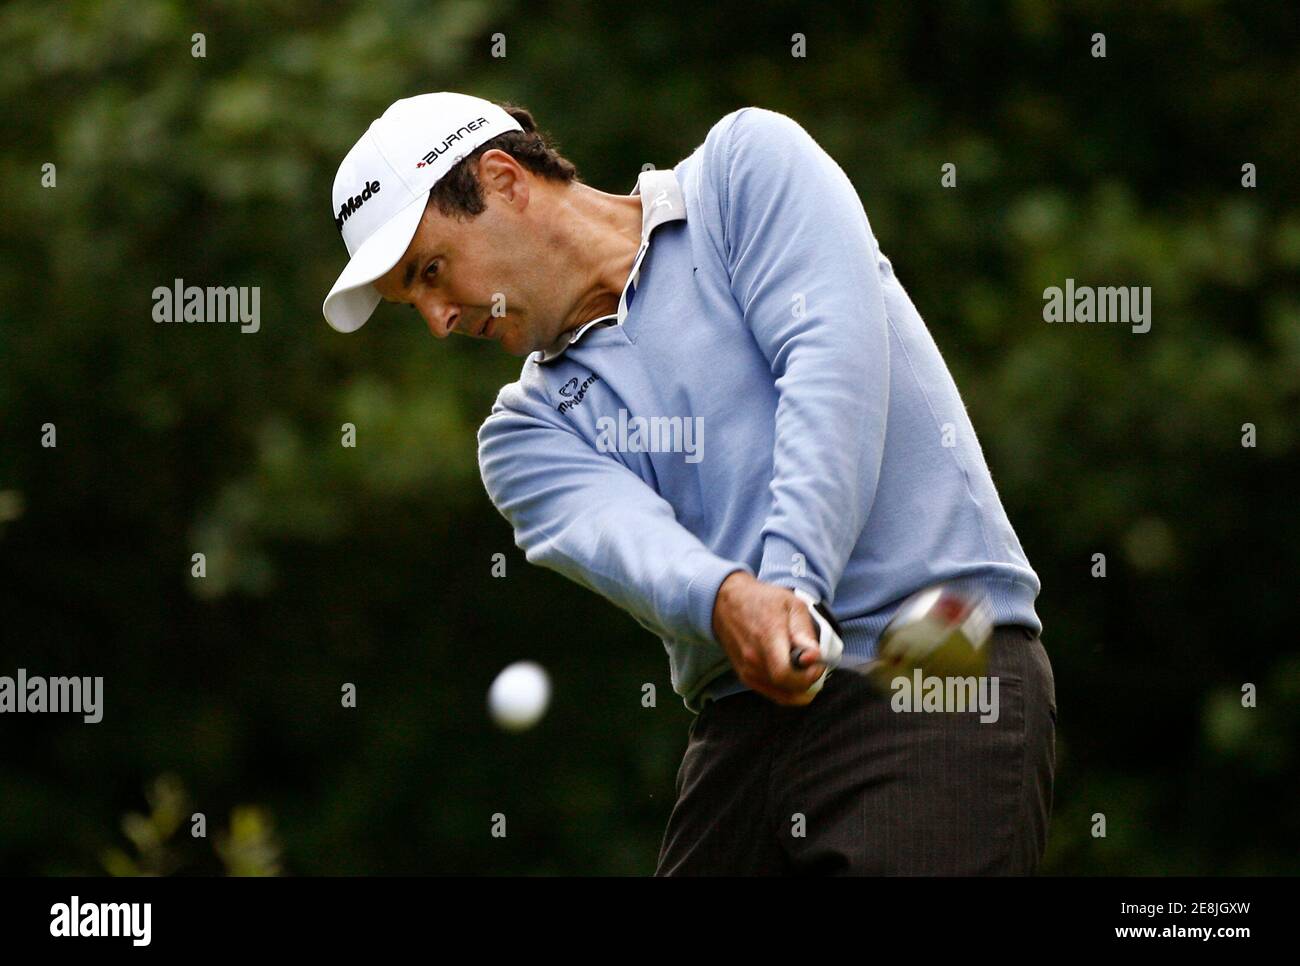 England's Simon Khan tees off at the eighteenth hole during the third round of the Scottish Open golf tournament at Loch Lommond near Glasgow, Scotland, July 12, 2008. REUTERS/David Moir (BRITAIN) Stock Photo